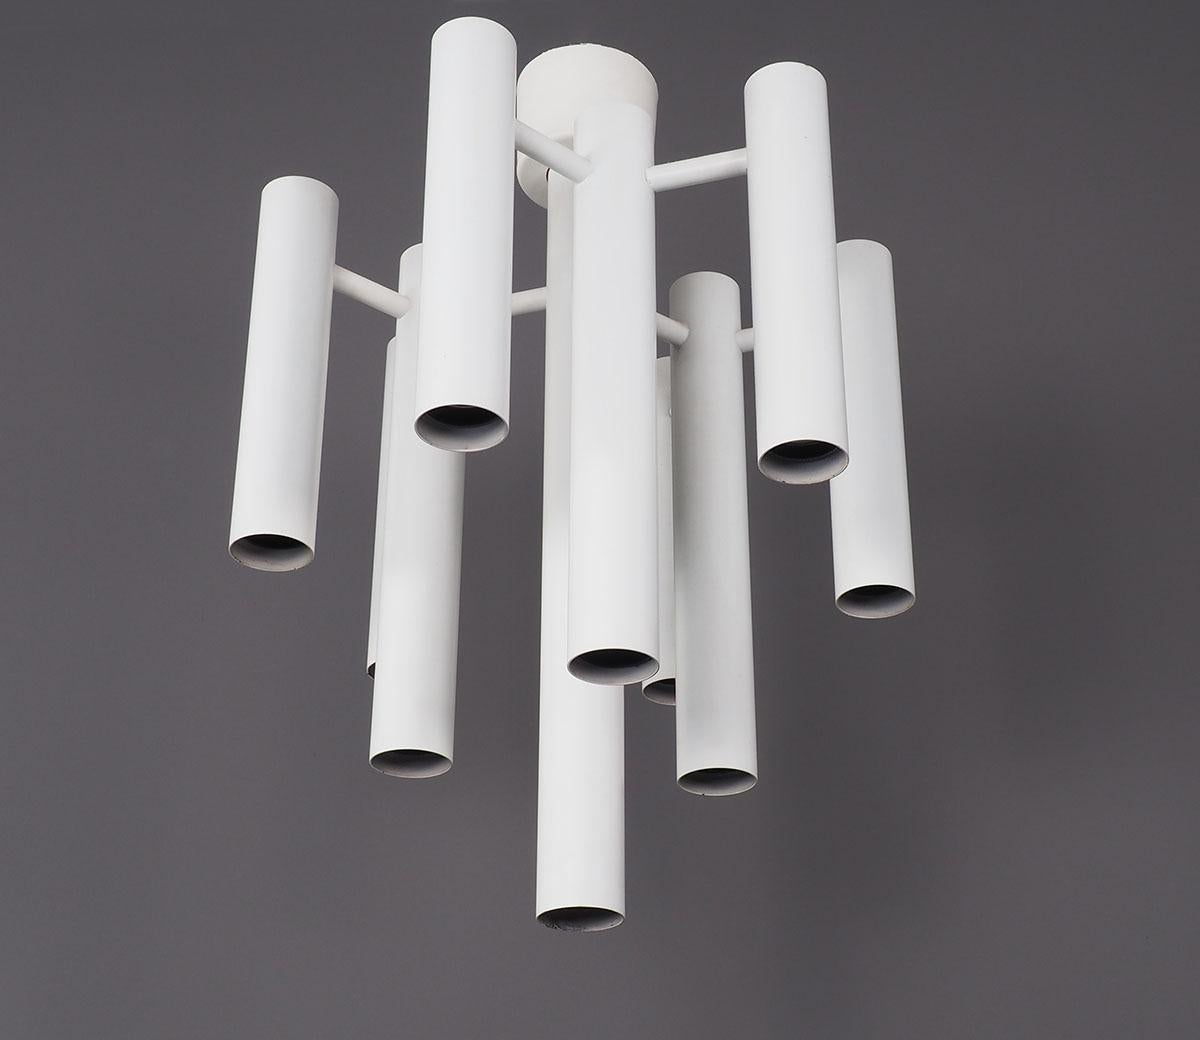 Space Age Ceiling Lamp in White Metal by Temde, 1970s For Sale 4